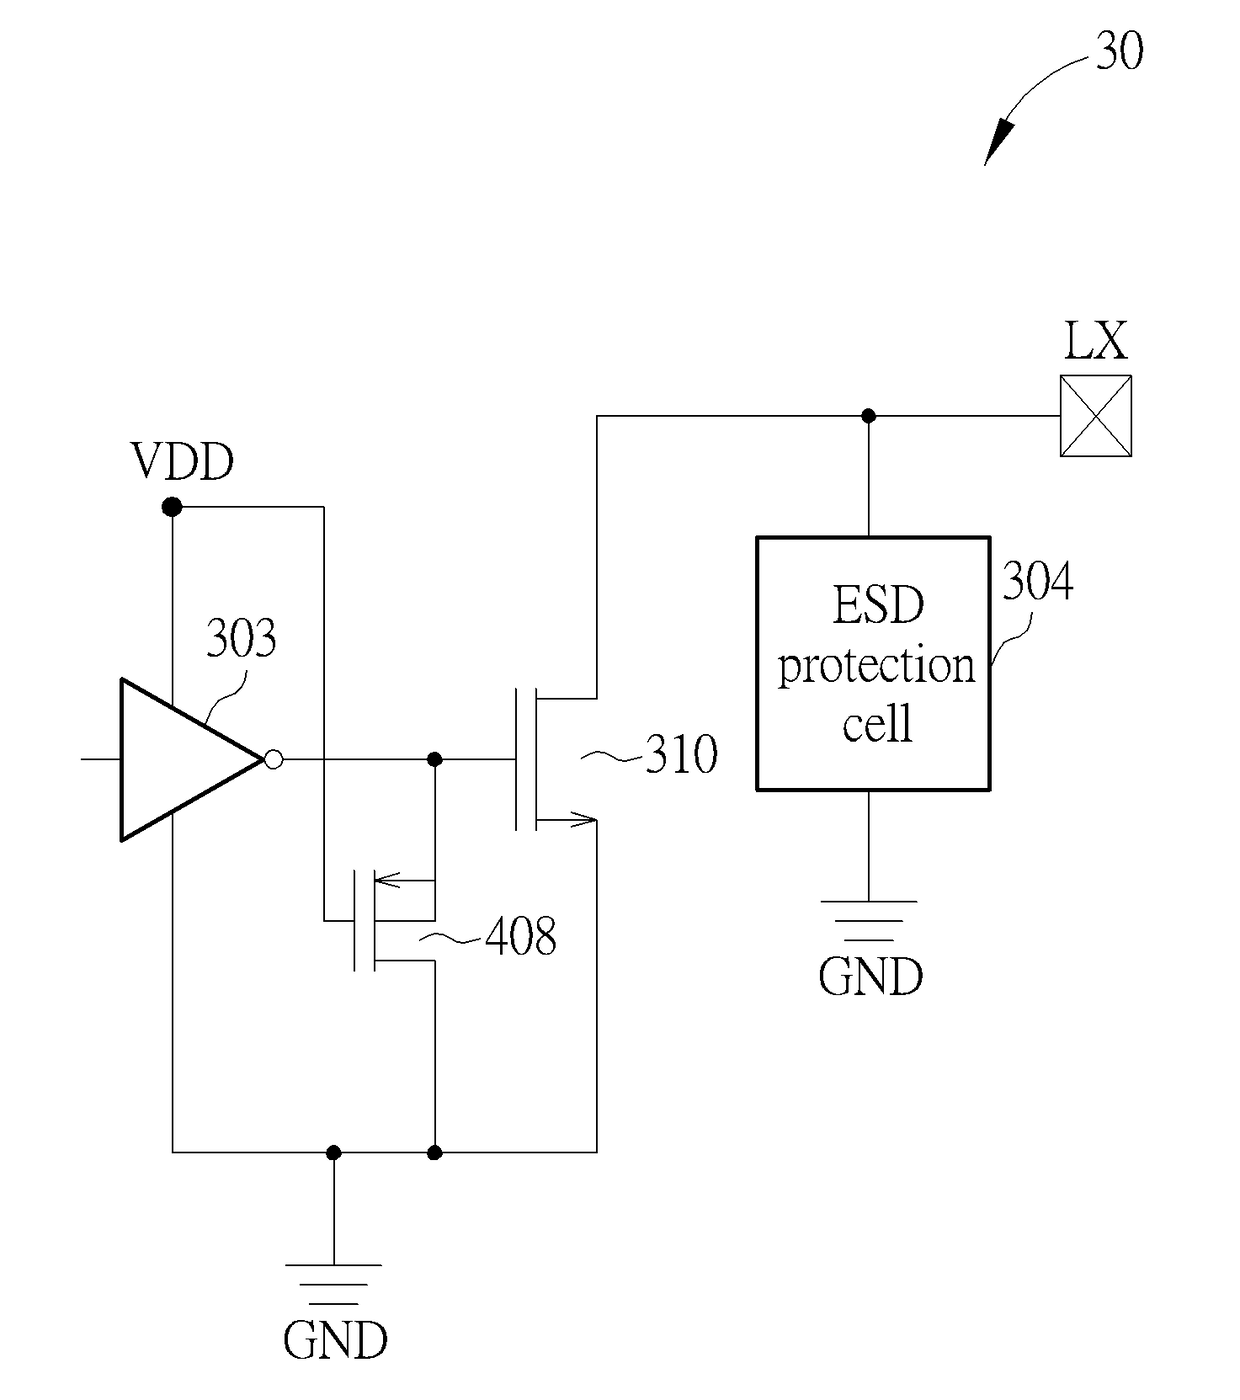 ESD protection control circuit and system